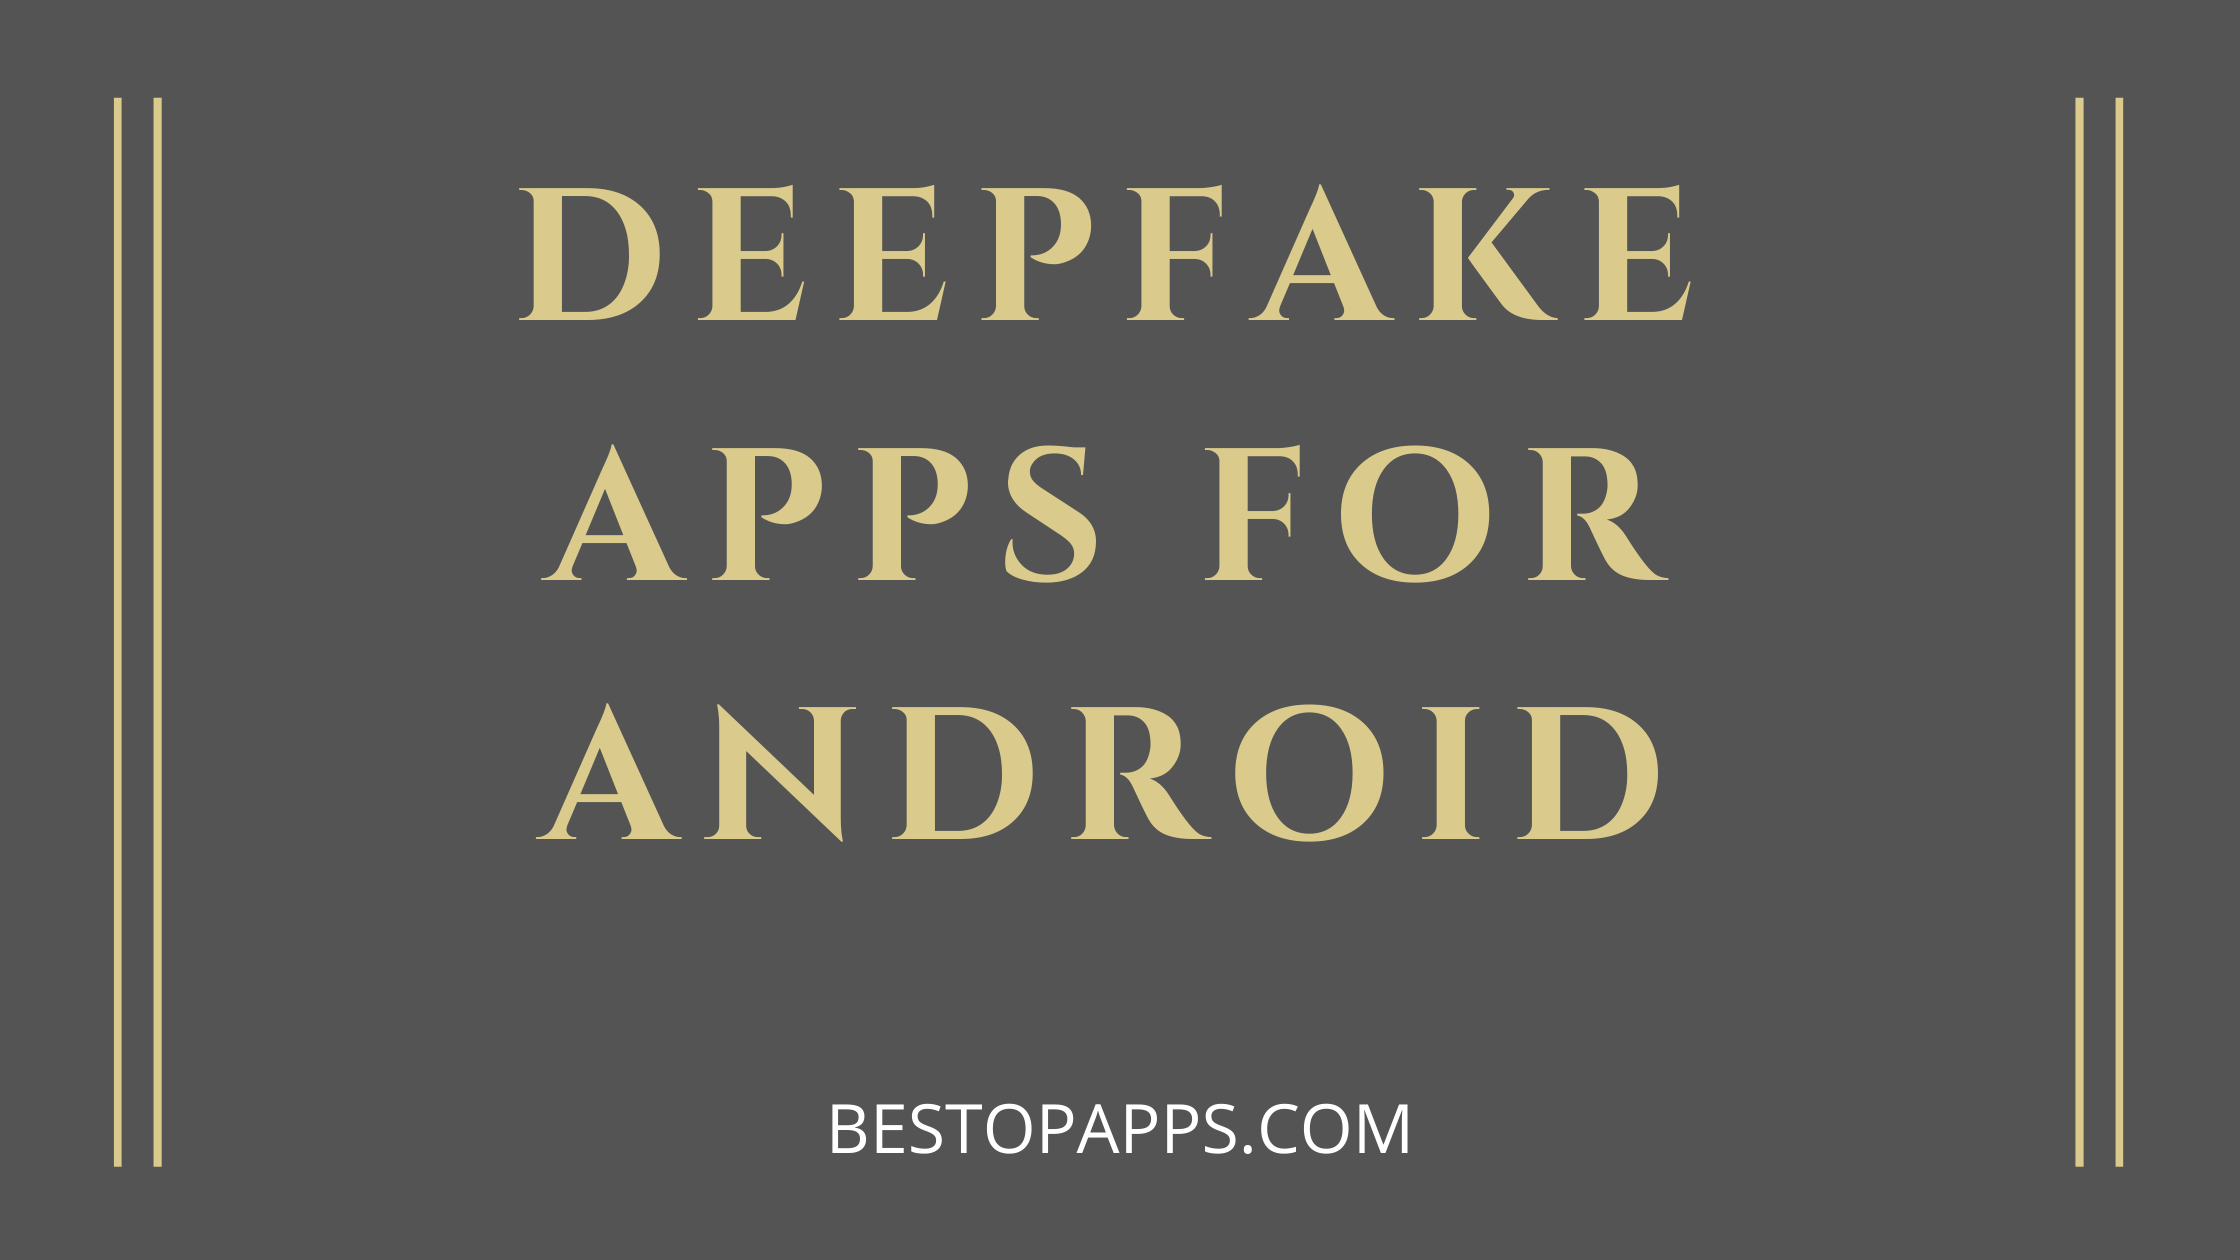 Deepfake apps for android